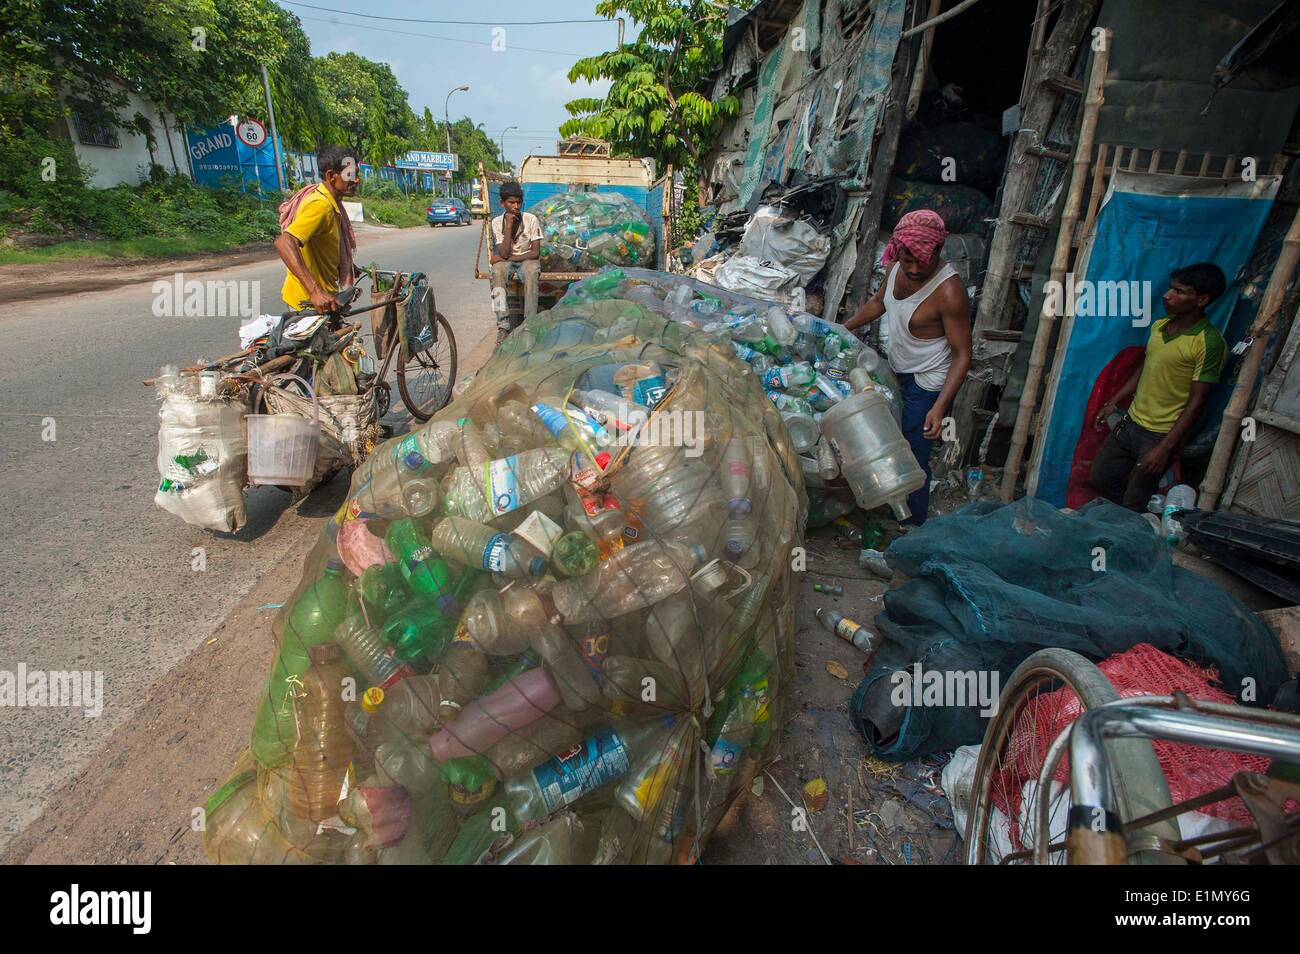 Calcutta, Indian state West Bengal. 6th June, 2014. Indian rag-pickers carry sacks of used plastic bottles collected from garbage near a dumping ground in Calcutta, capital of eastern Indian state West Bengal, June 6, 2014. According to National Physical Laboratory report 2013, garbage pressure in Calcutta of 16.5 tonnes per square kilometer, is the highest in the country. © Tumpa Mondal/Xinhua/Alamy Live News Stock Photo